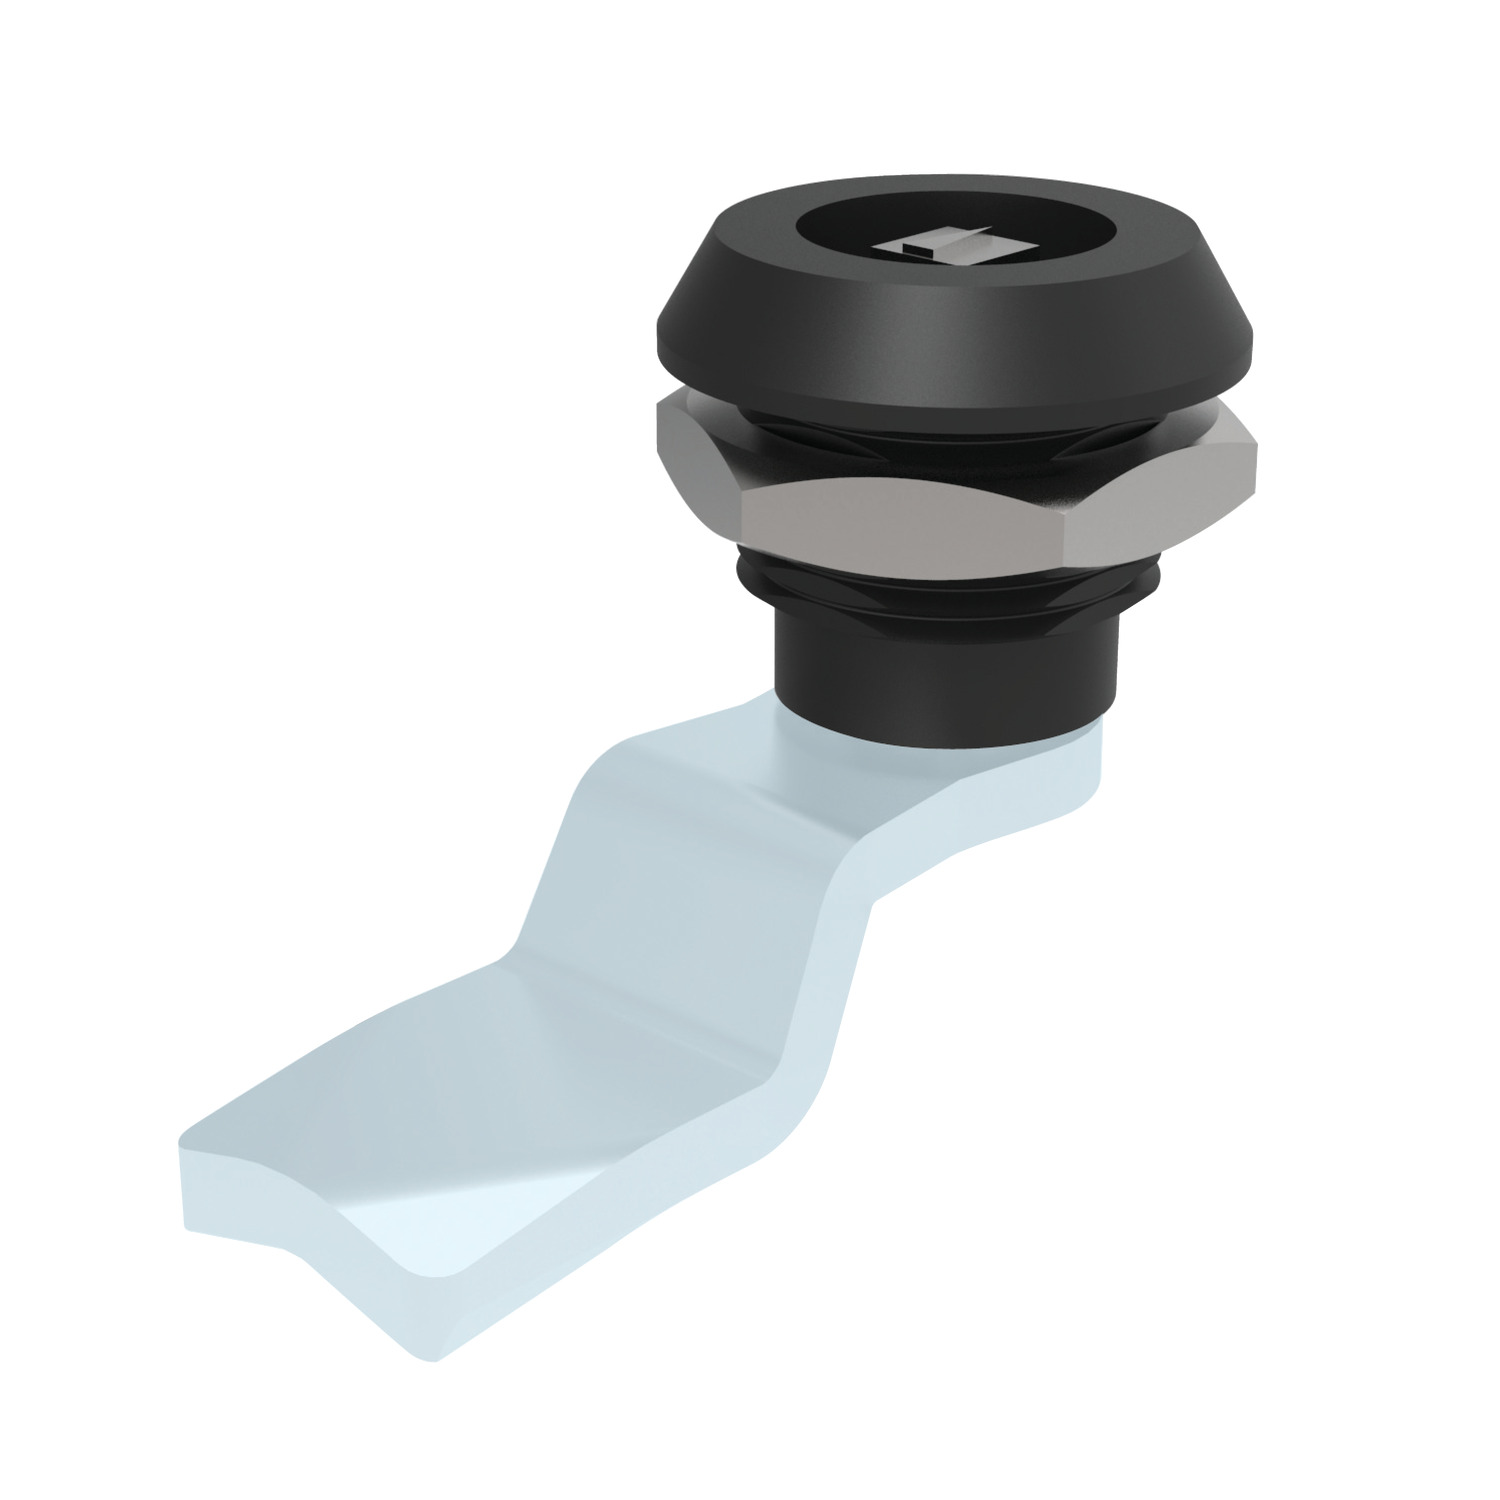 A1021.AW0060 Cam Latch Flexi-System - 3 mm Double Bit insert driver - fixed grip - Polyamide Plastic, Black